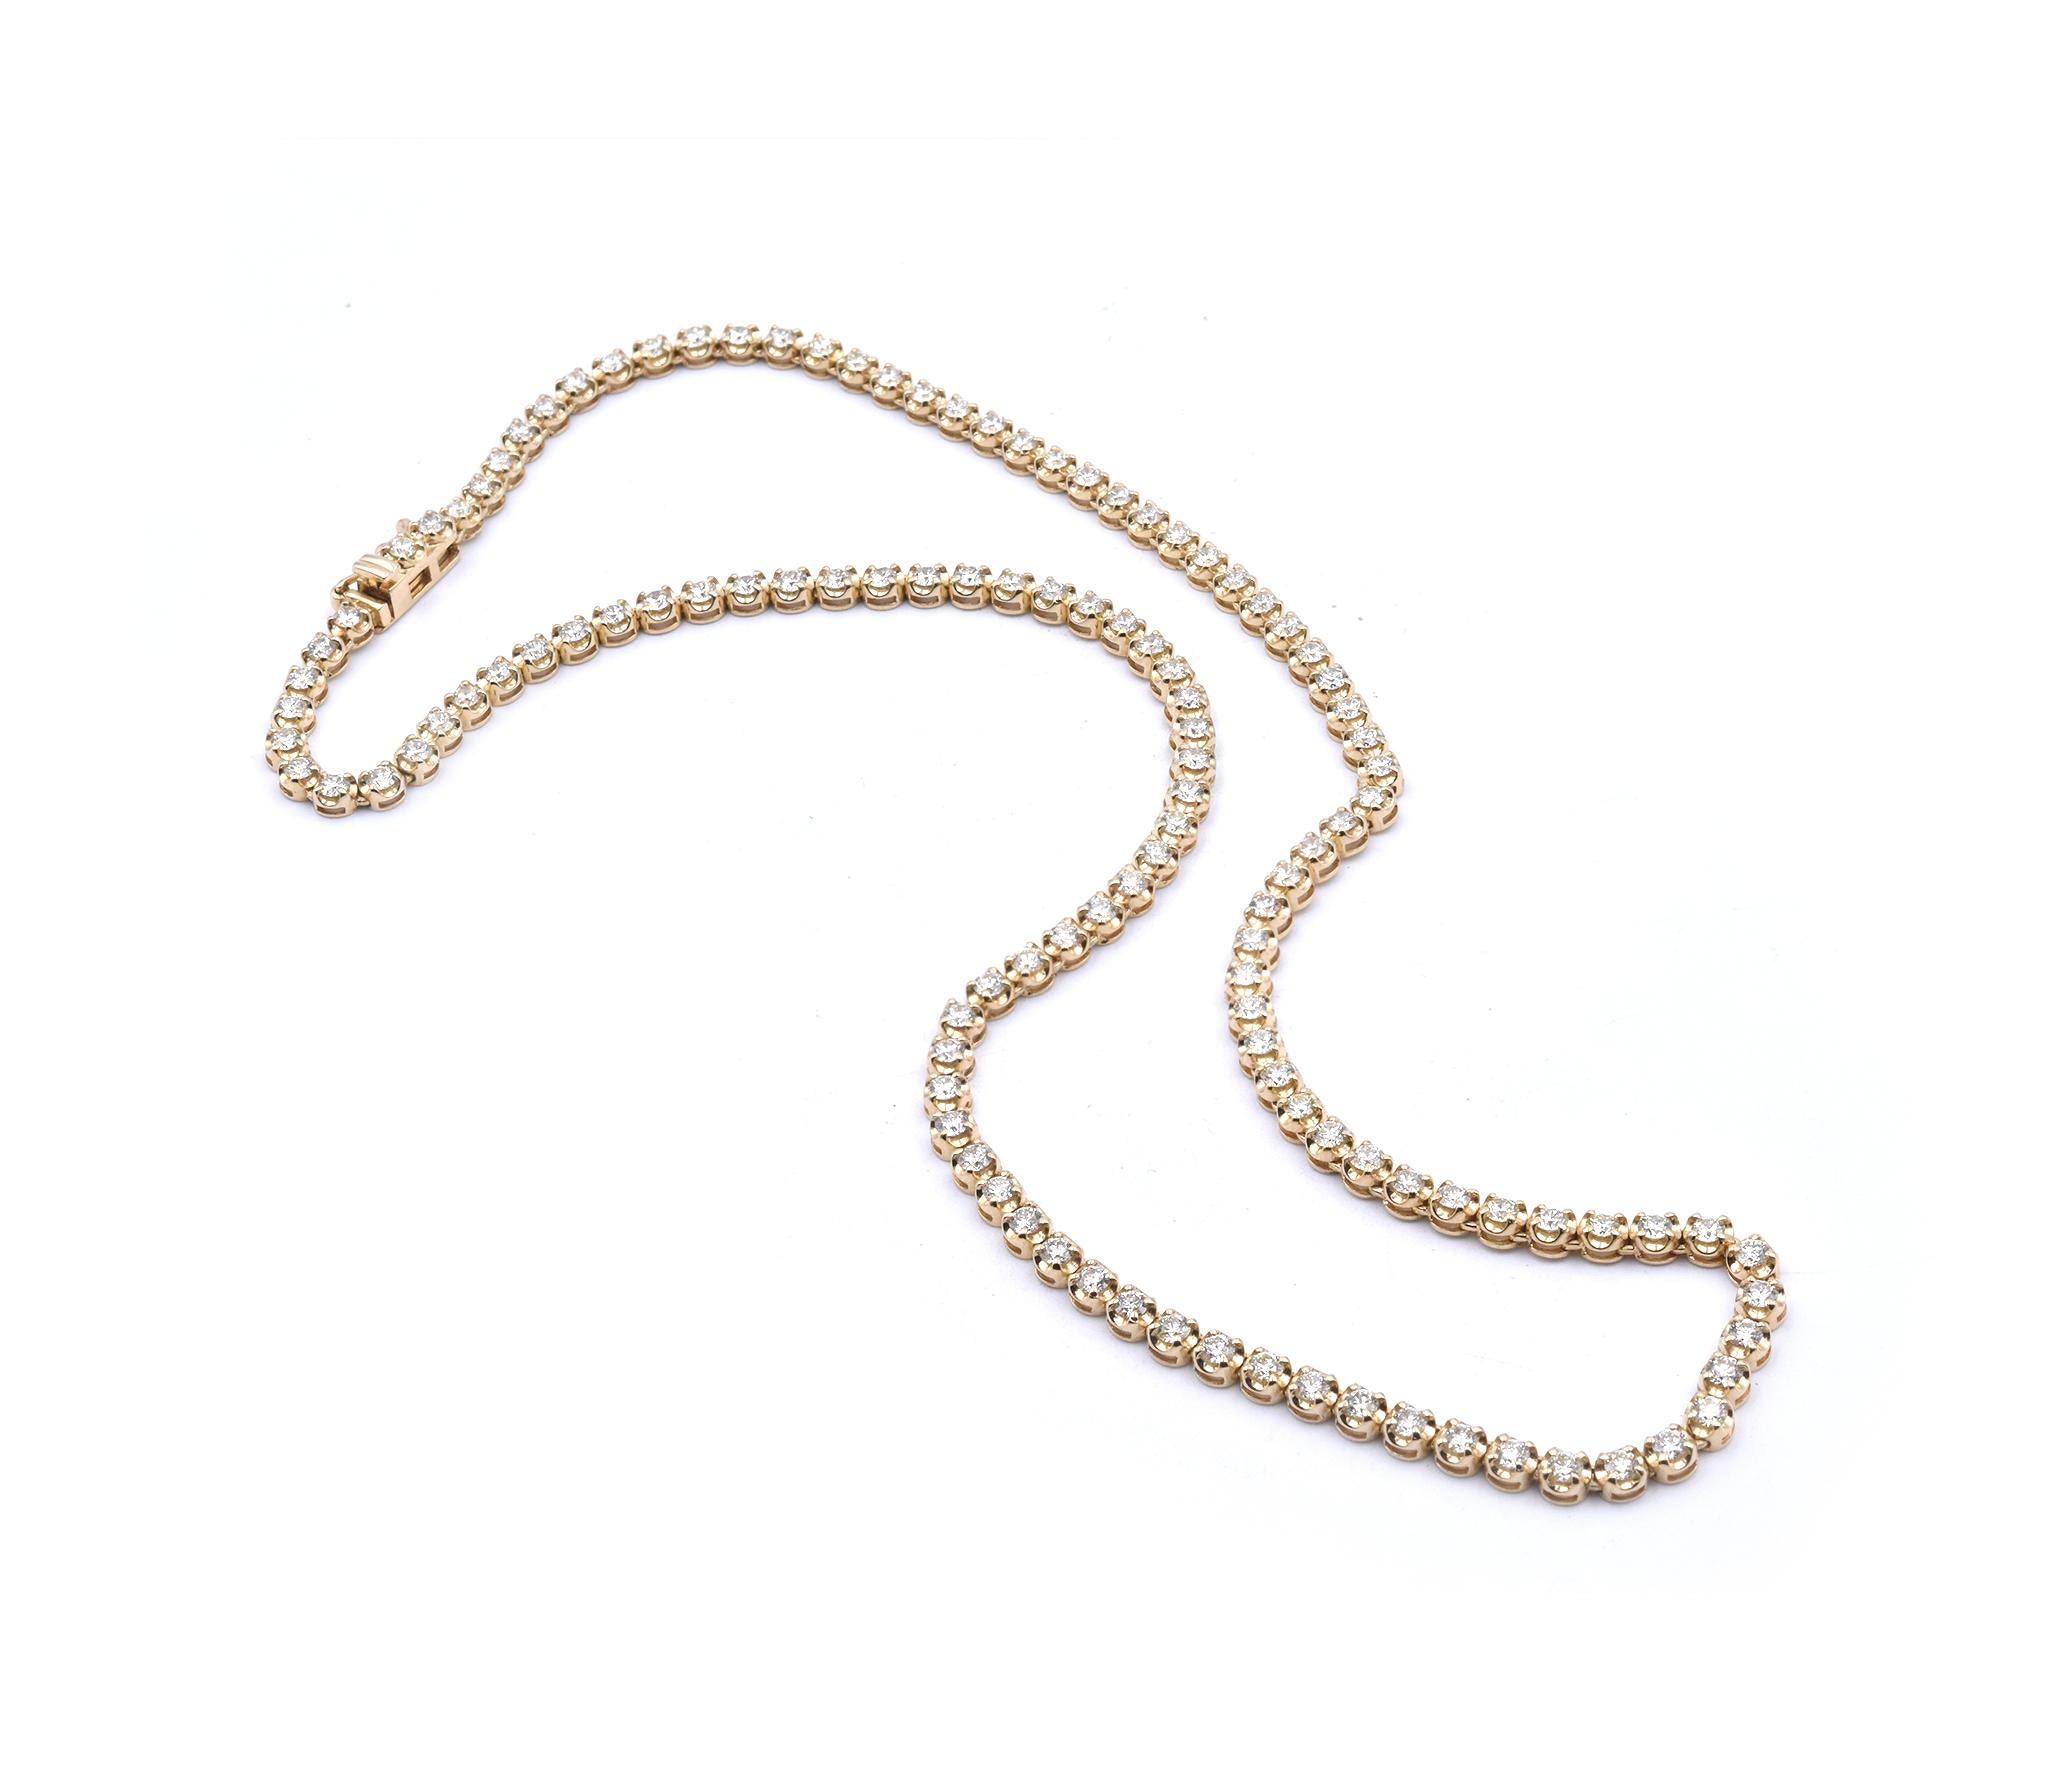 Designer: custom designed
Material: 14k yellow gold
Diamonds: round brilliant cut= 5.50cttw
Color: I-J
Clarity: SI
Dimensions: necklace is 16.75-inches long and it is approximately 3.45mm wide
Weight: 14.36 grams